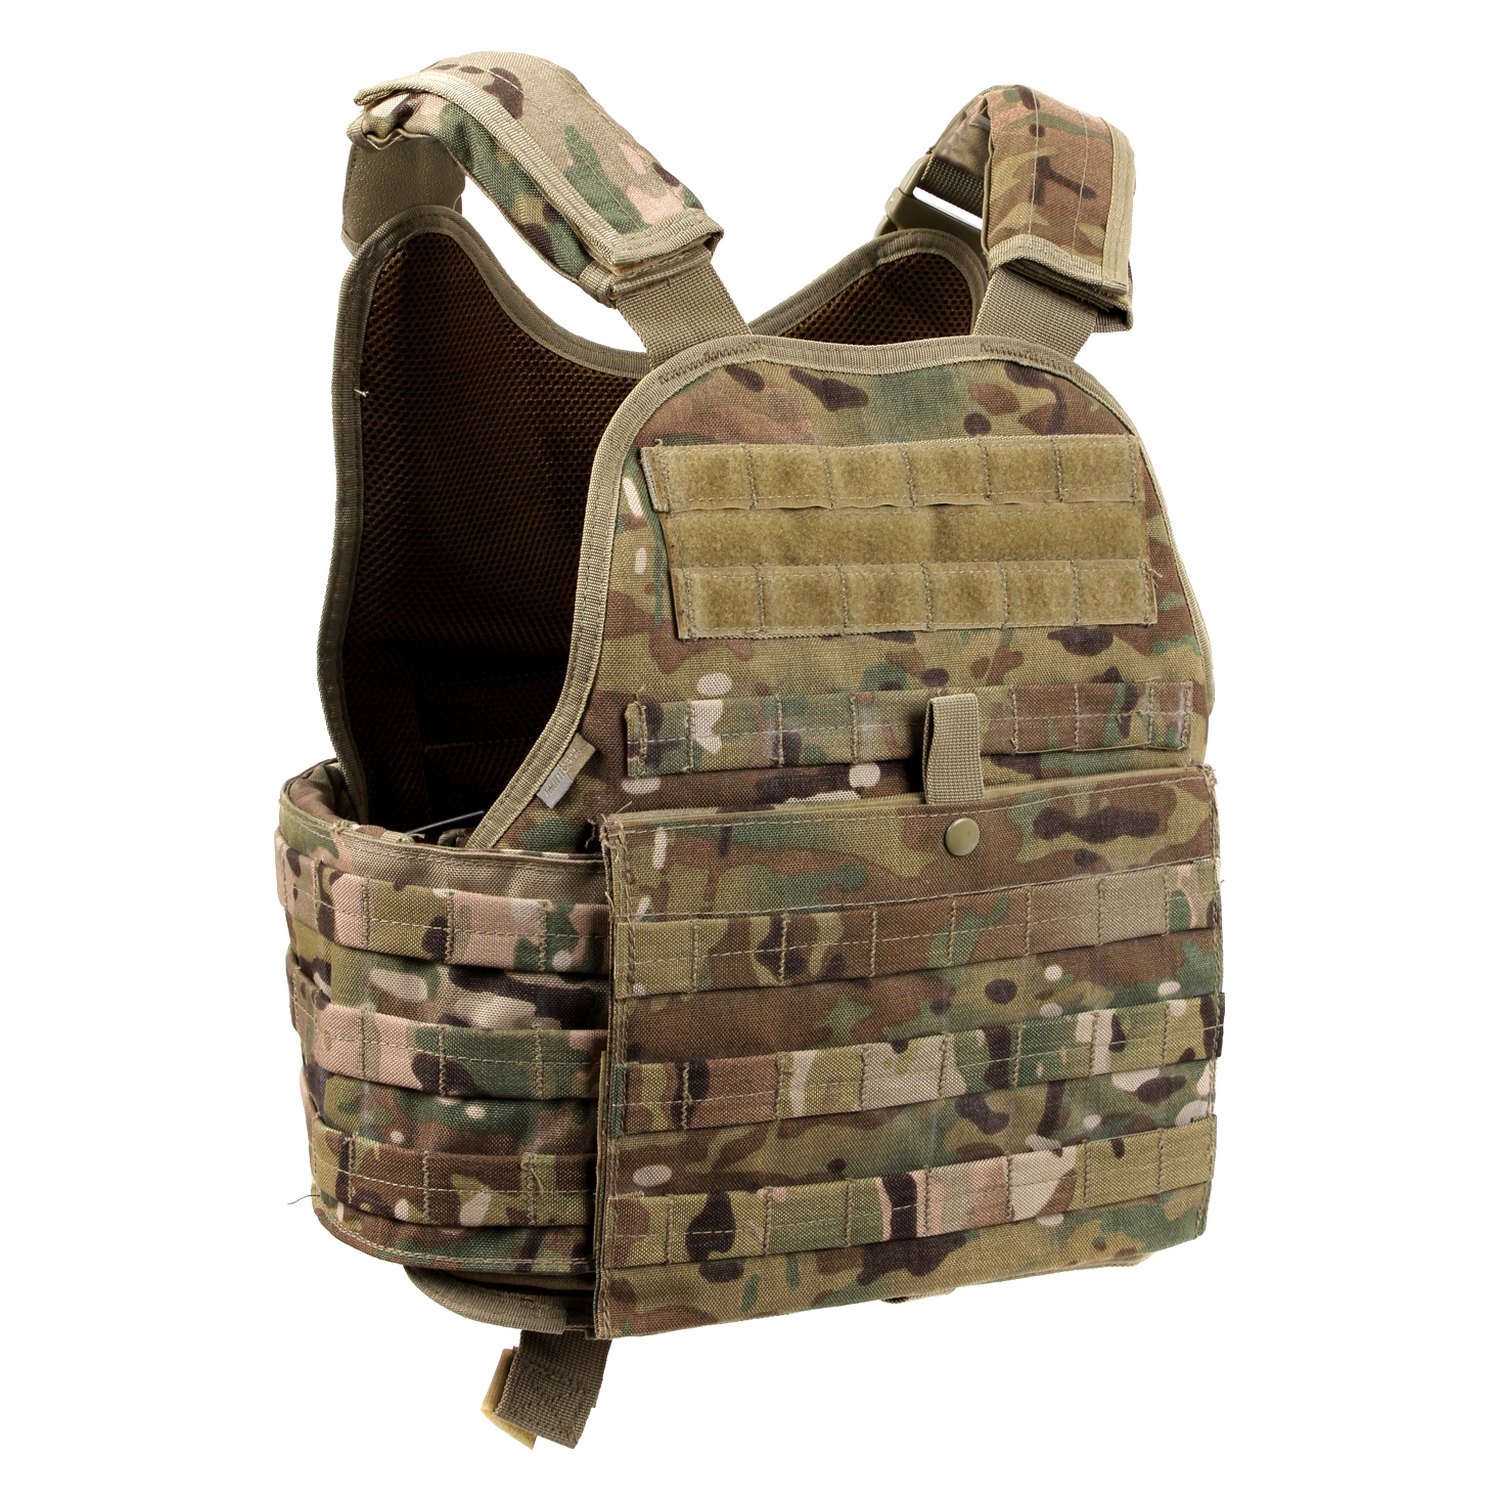 Tactical Light Weight Plate Carrier Vest Modular Multicam OCP Molle Rothco 55893 